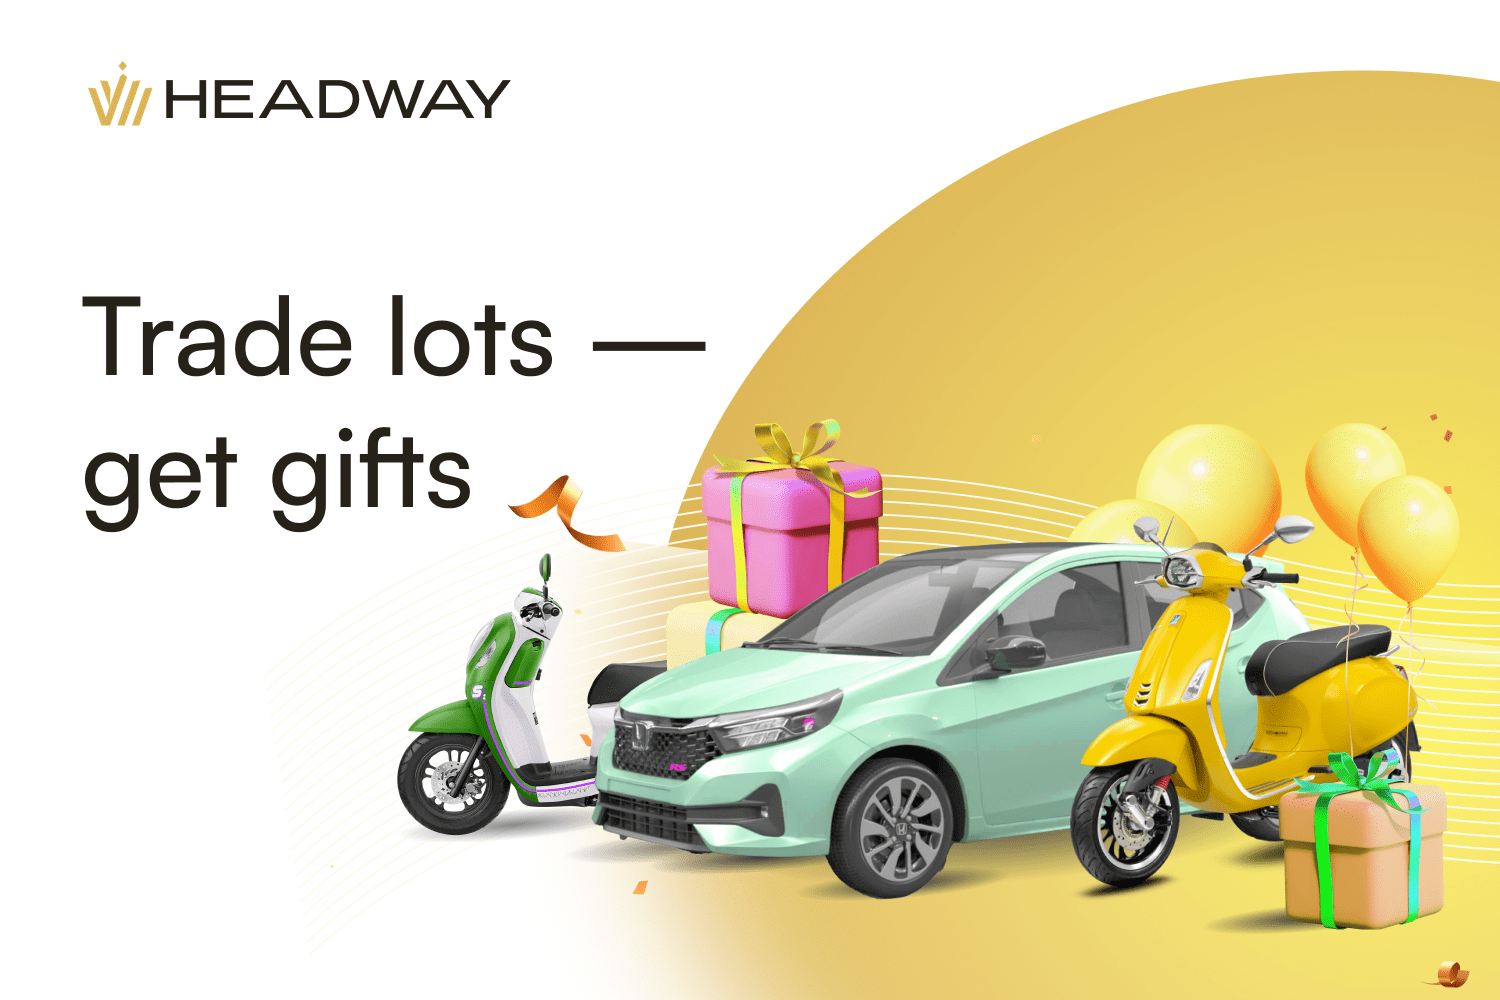 Trade lots – get gifts